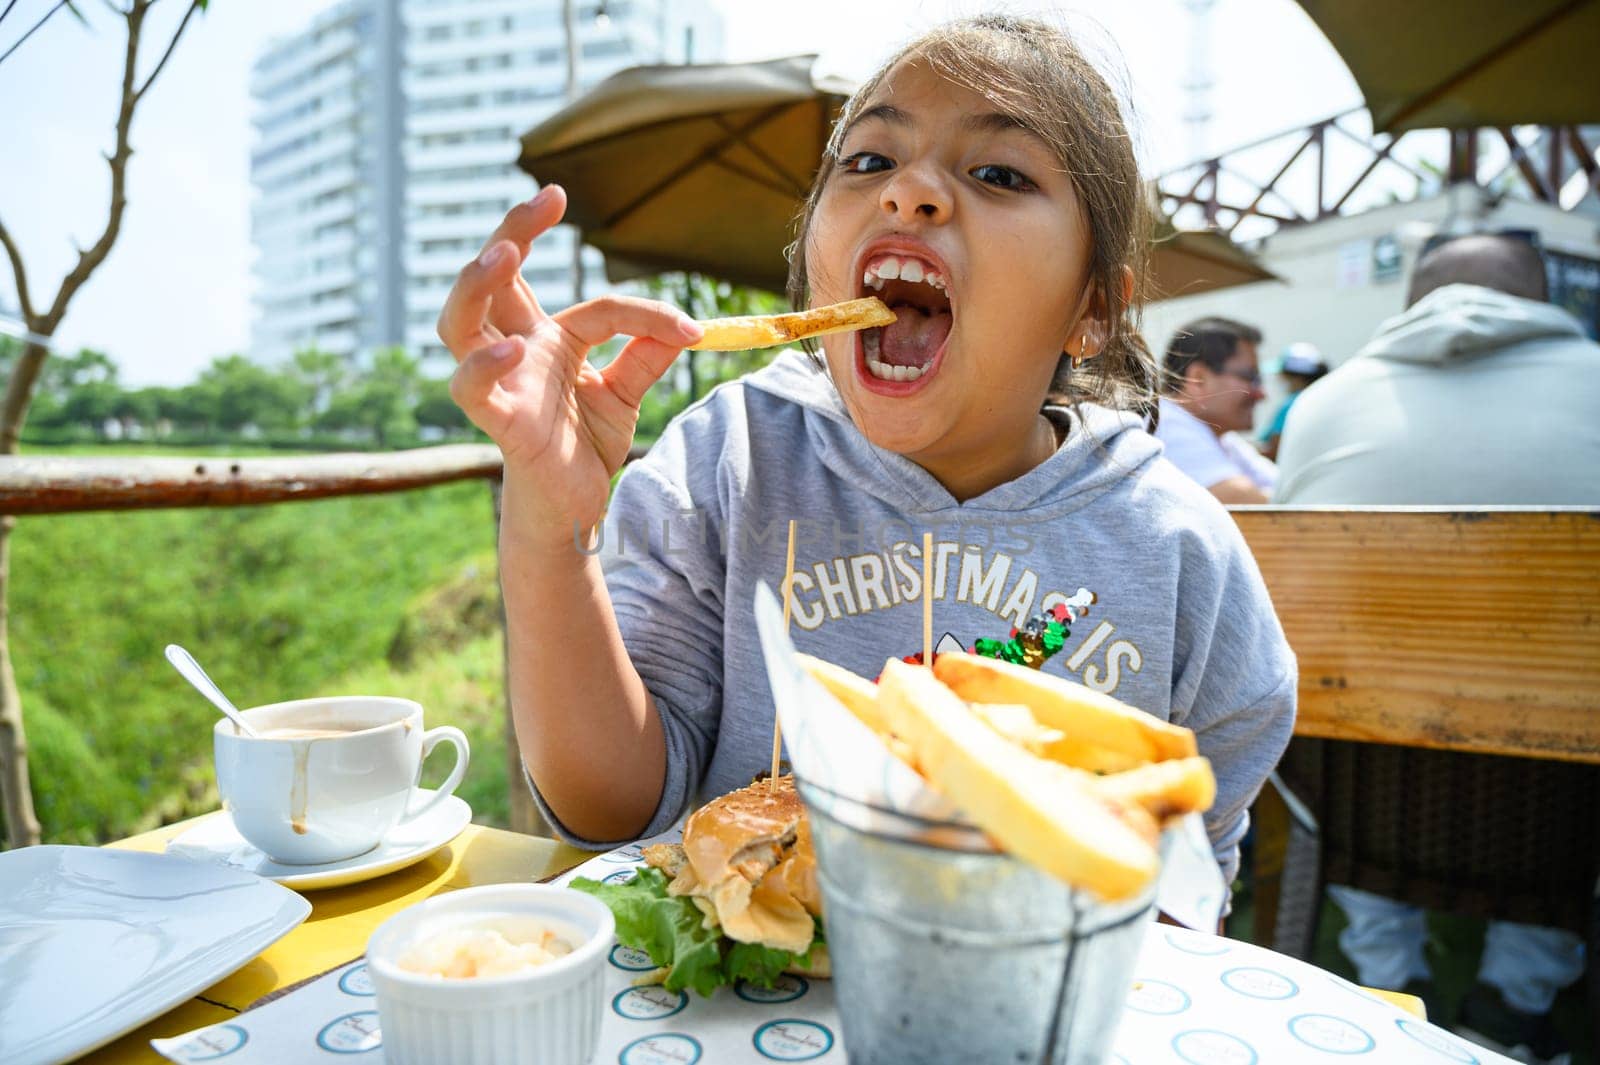 little girl has breakfast in a cafe, eats hamburger and french fries, drinks chocolate